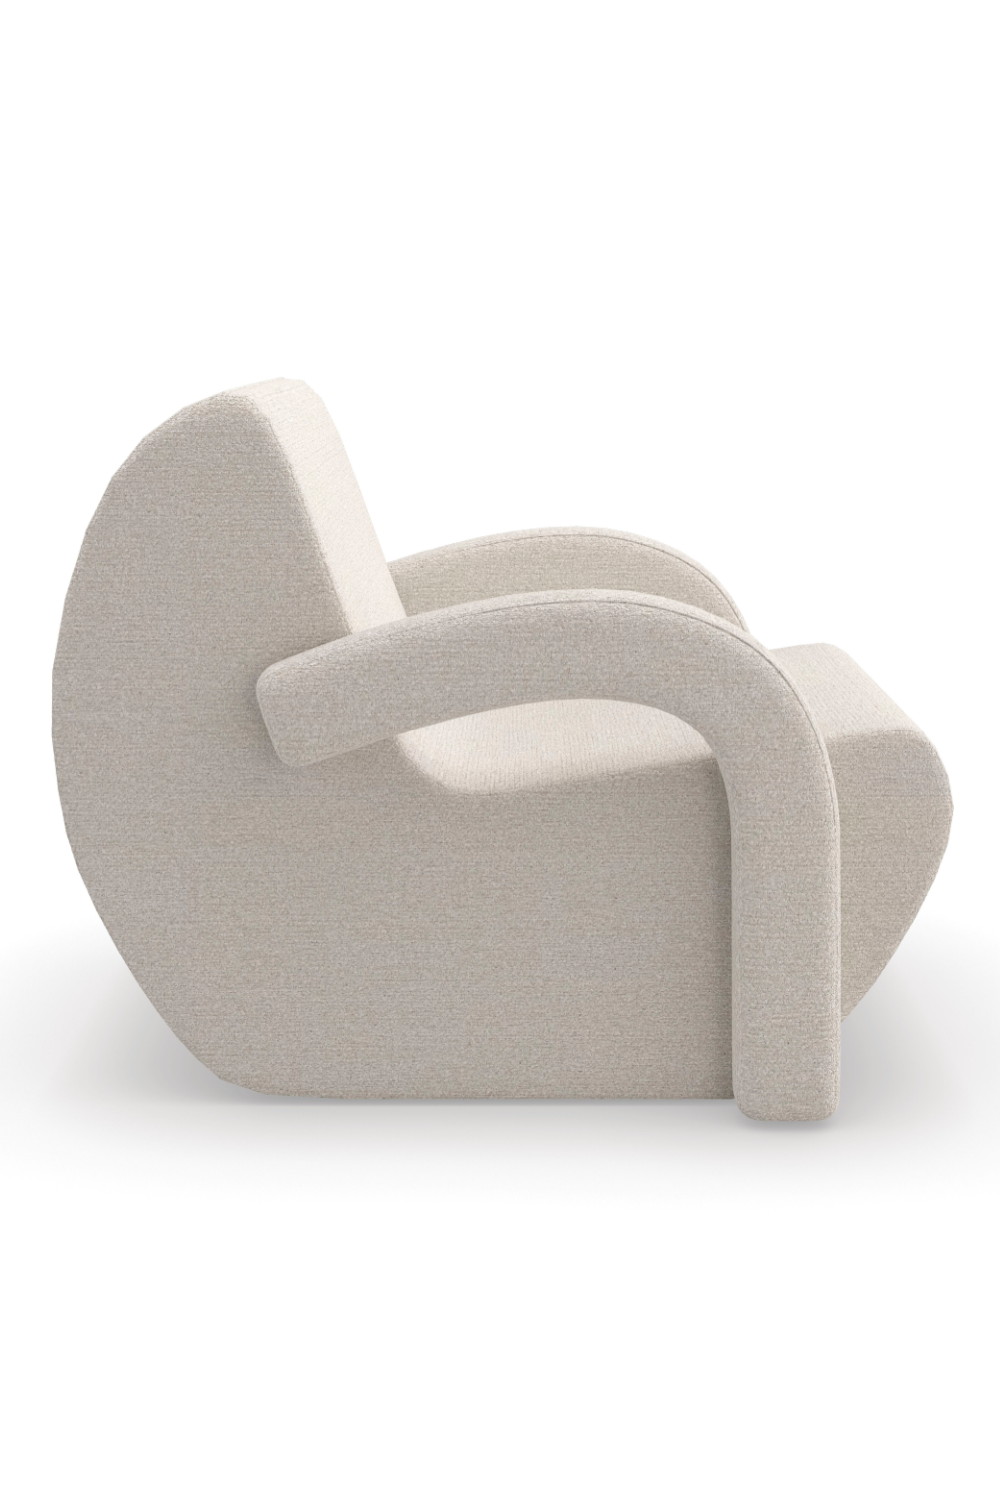 White Bouclé Arched Accent Chair | Andrew Martin Leo | Oroa.com